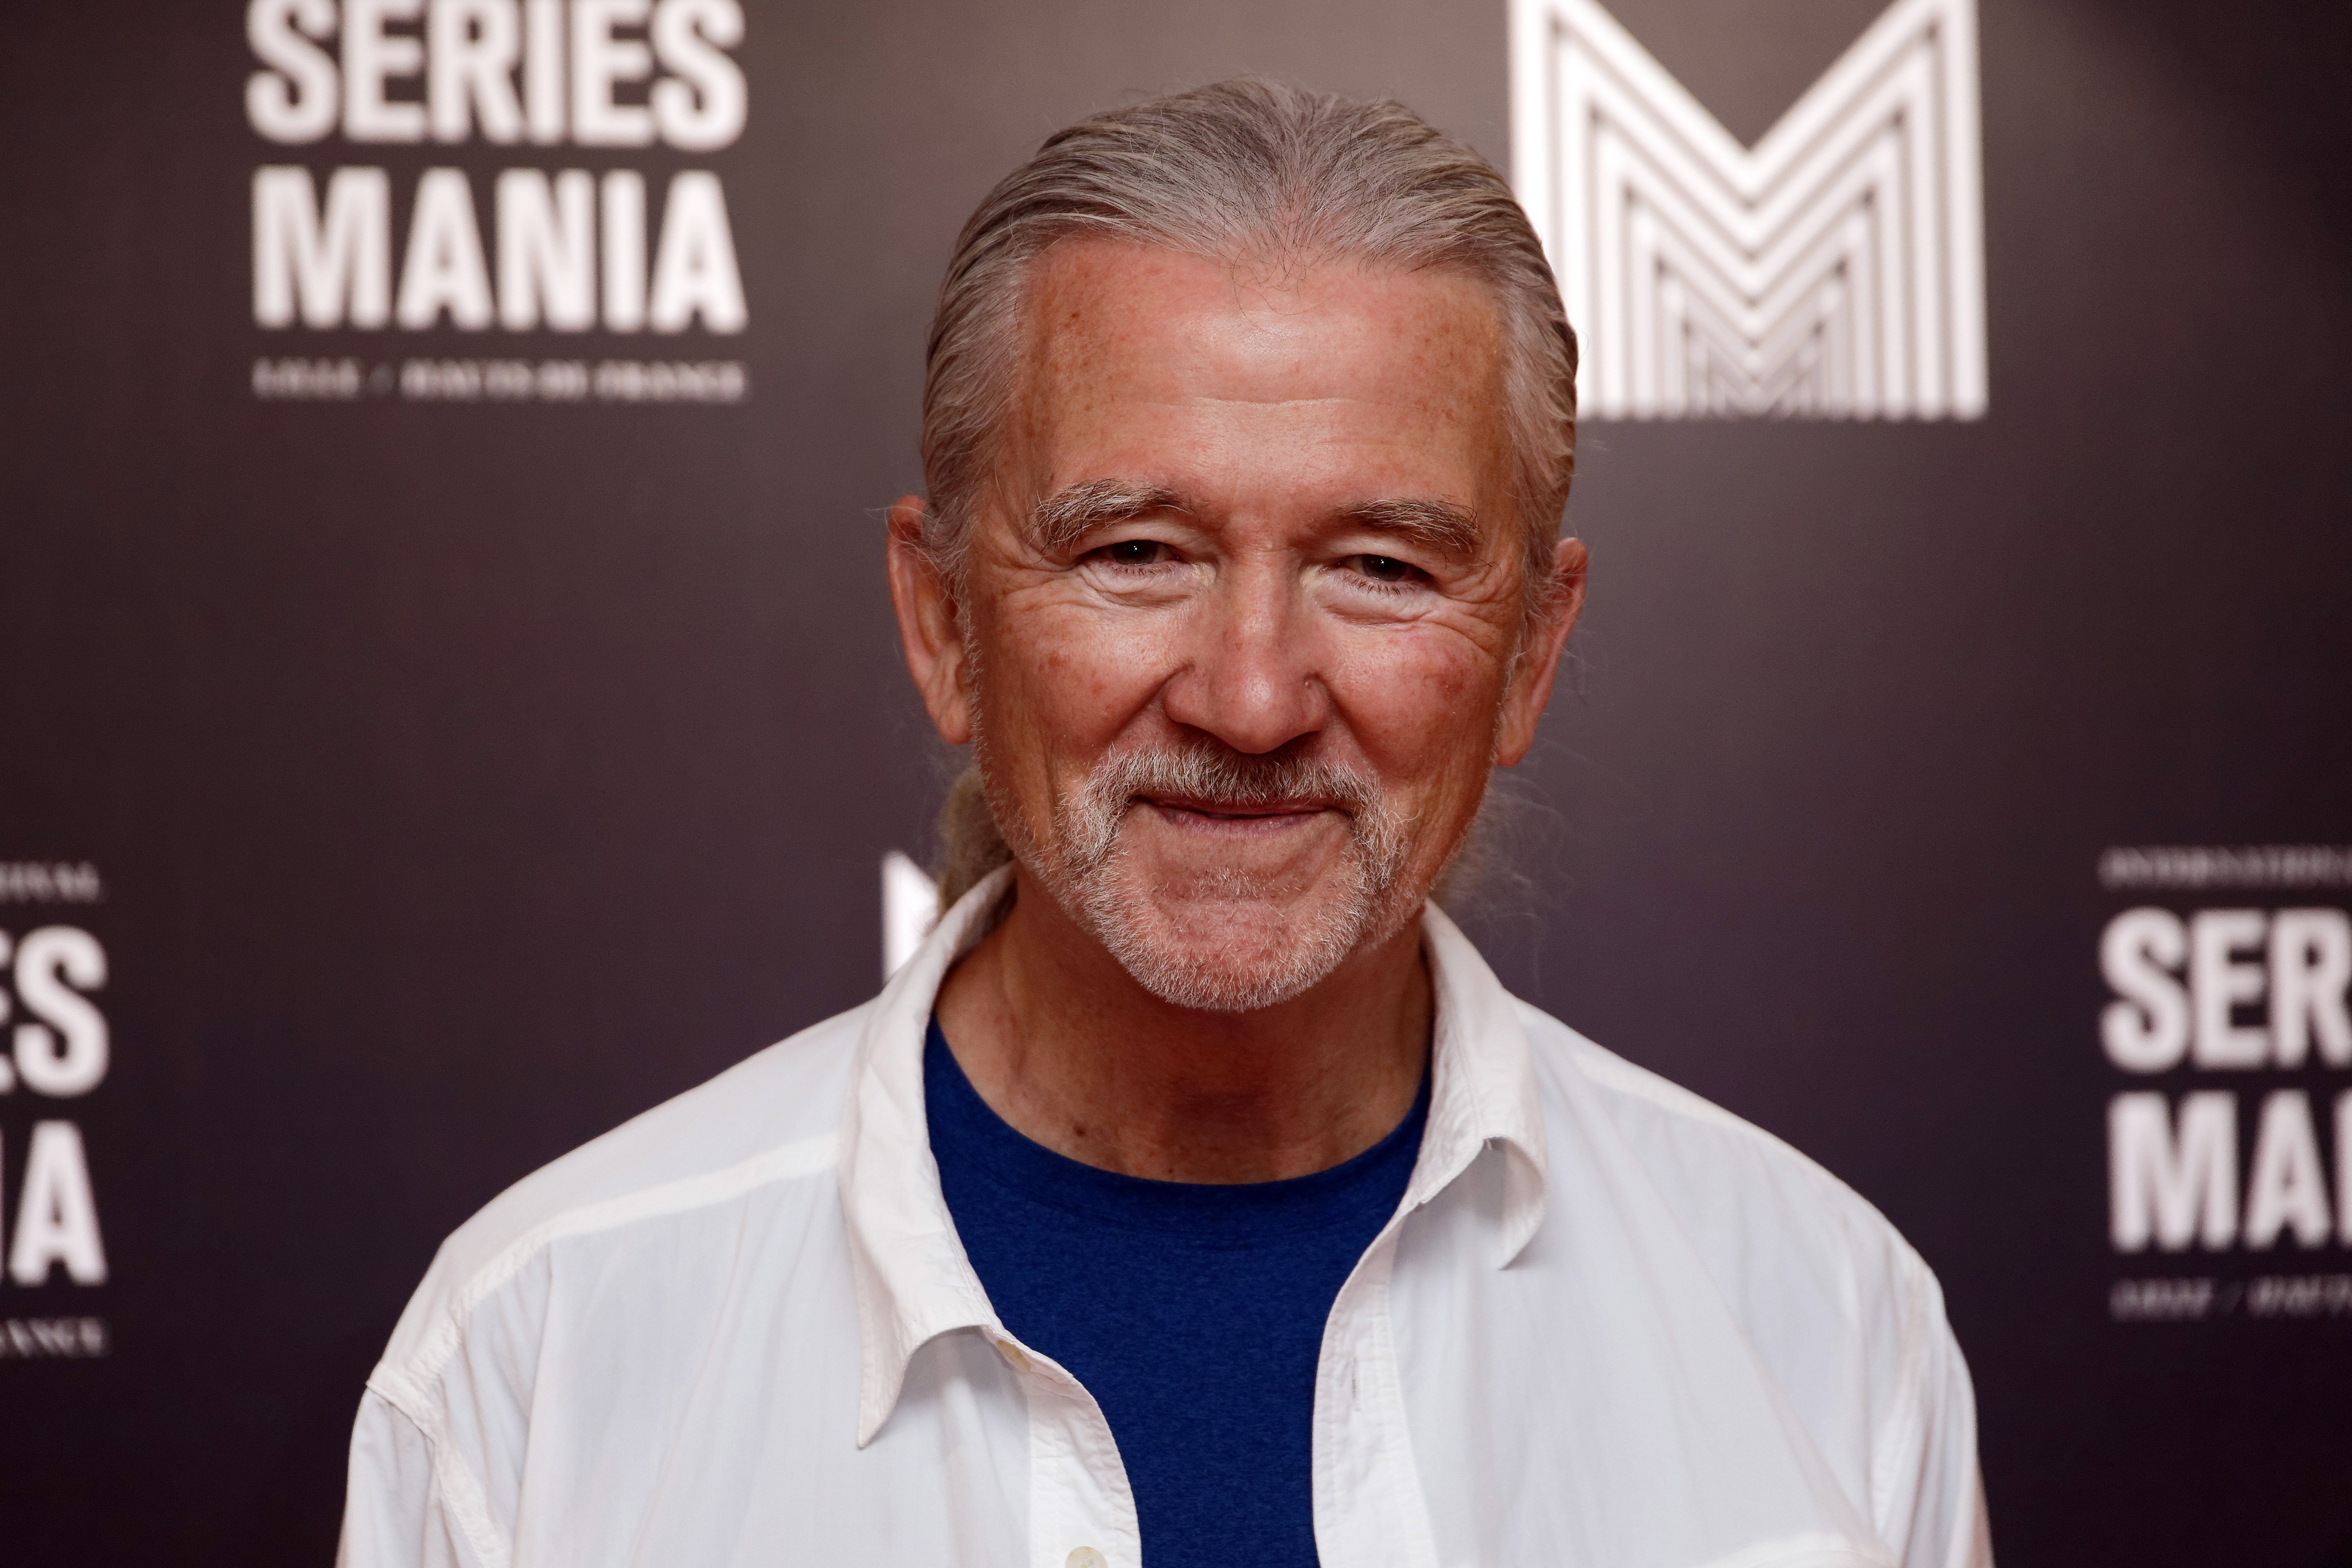 Veteran actor Patrick Duffy attends the Series Mania in Lille, France on  May 2, 2018 | Photo: Getty Images